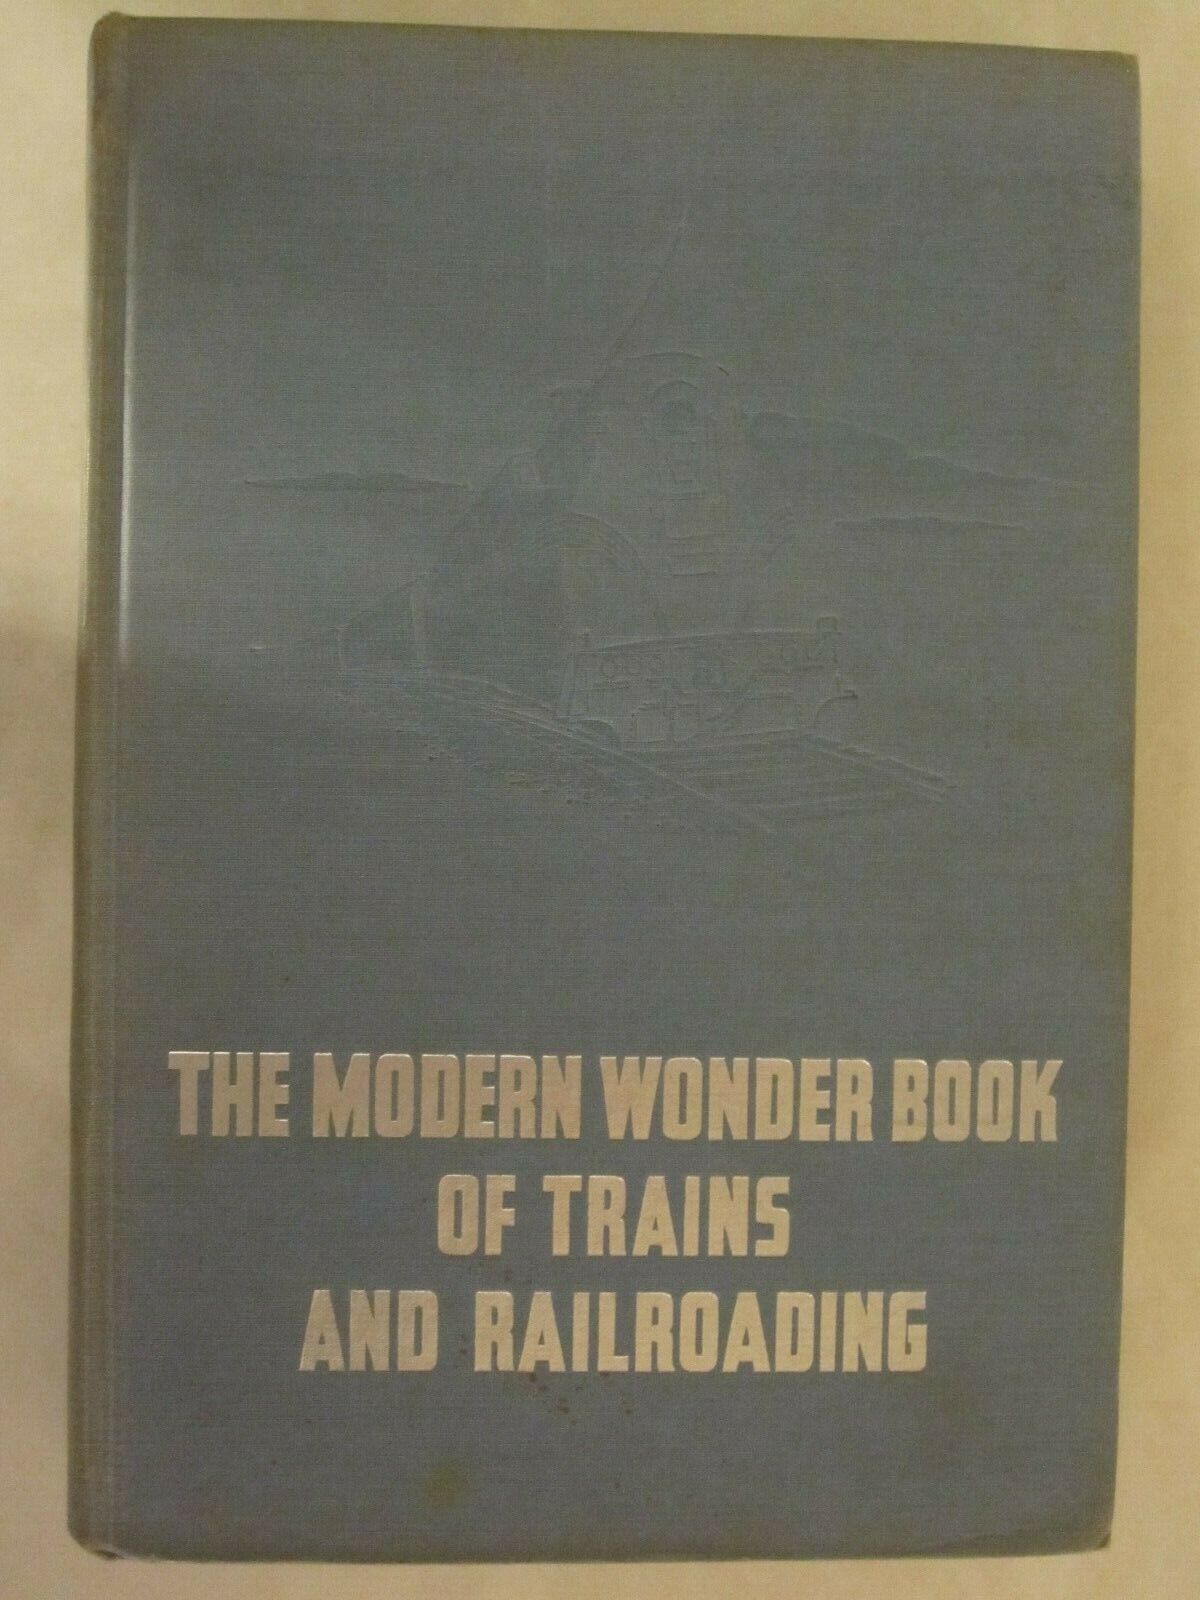 The Modern Wonder Book of Trains and Railroading *VINTAGE*